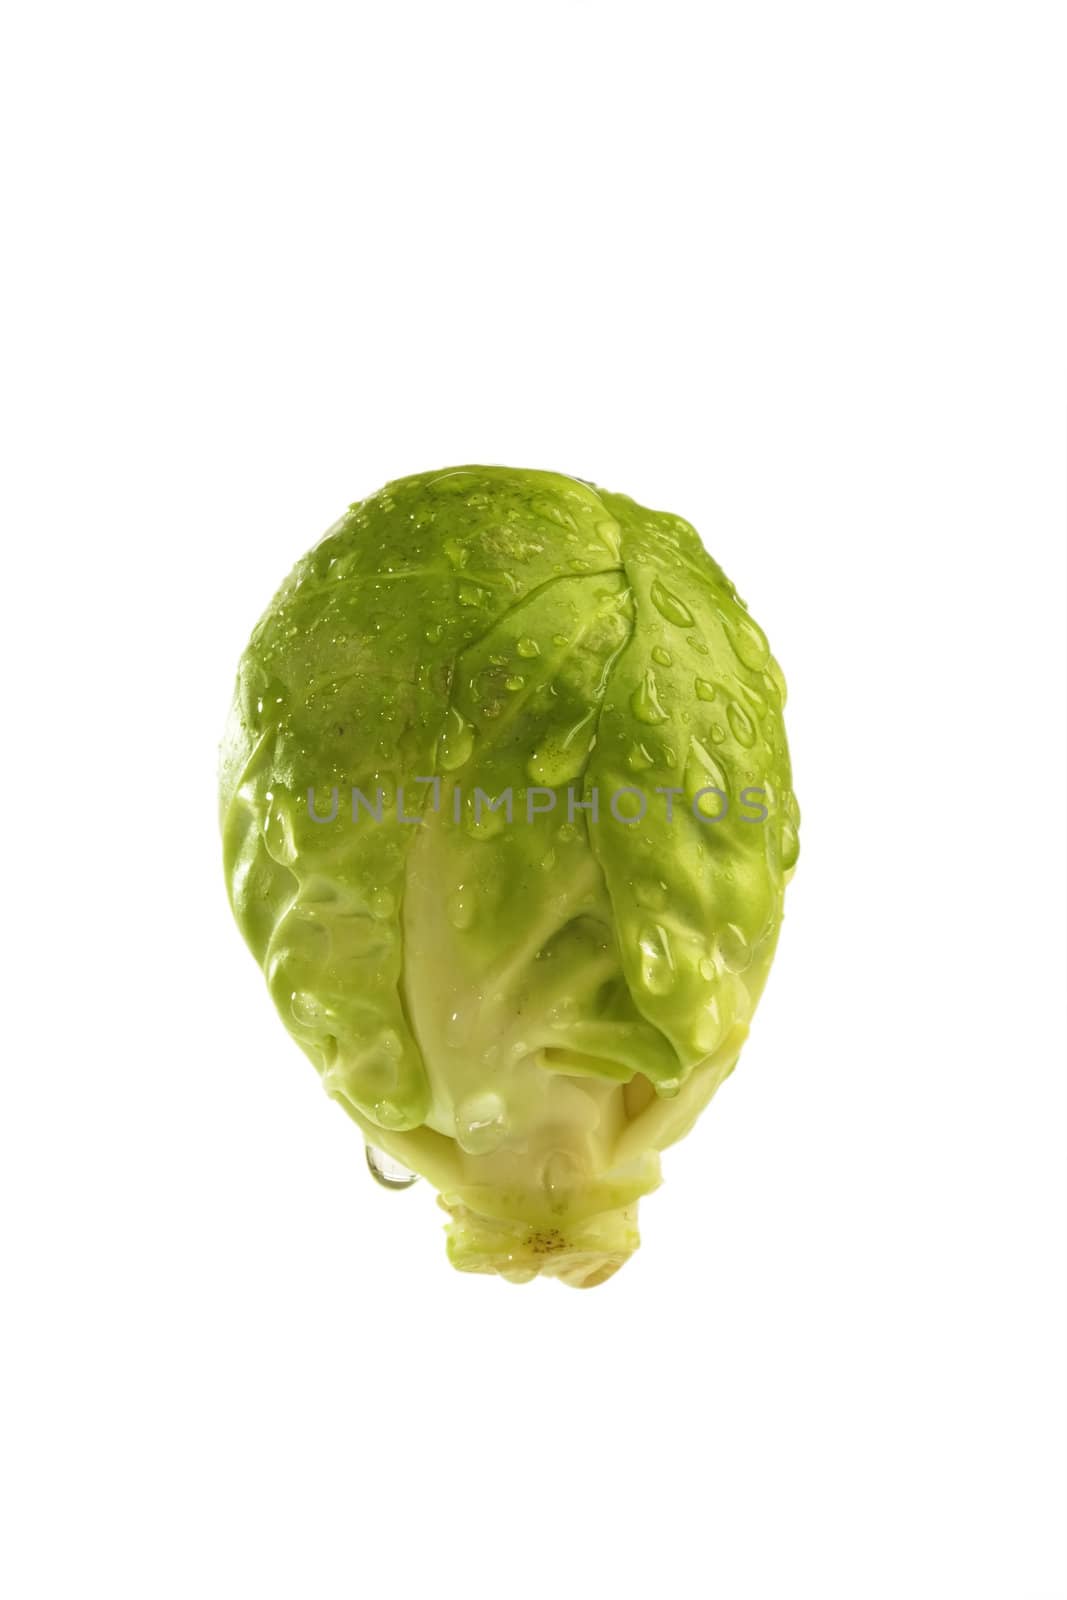 Brussel Sprout by Teamarbeit